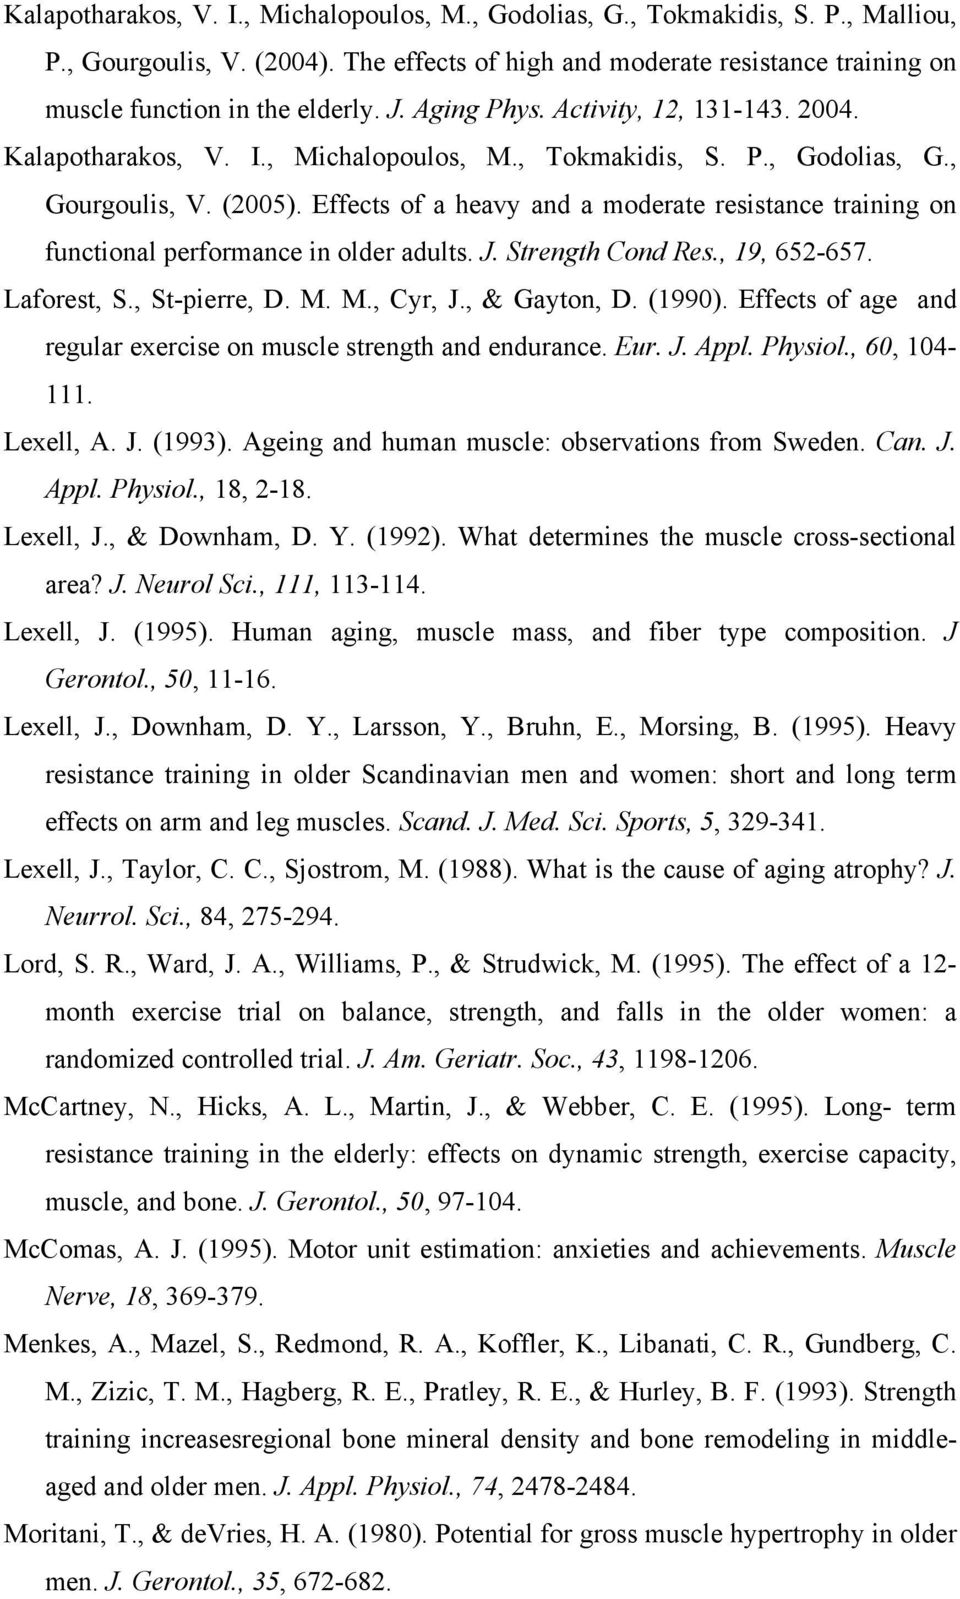 Effects of a heavy and a moderate resistance training on functional performance in older adults. J. Strength Cond Res., 19, 652-657. Laforest, S., St-pierre, D. M. M., Cyr, J., & Gayton, D. (1990).